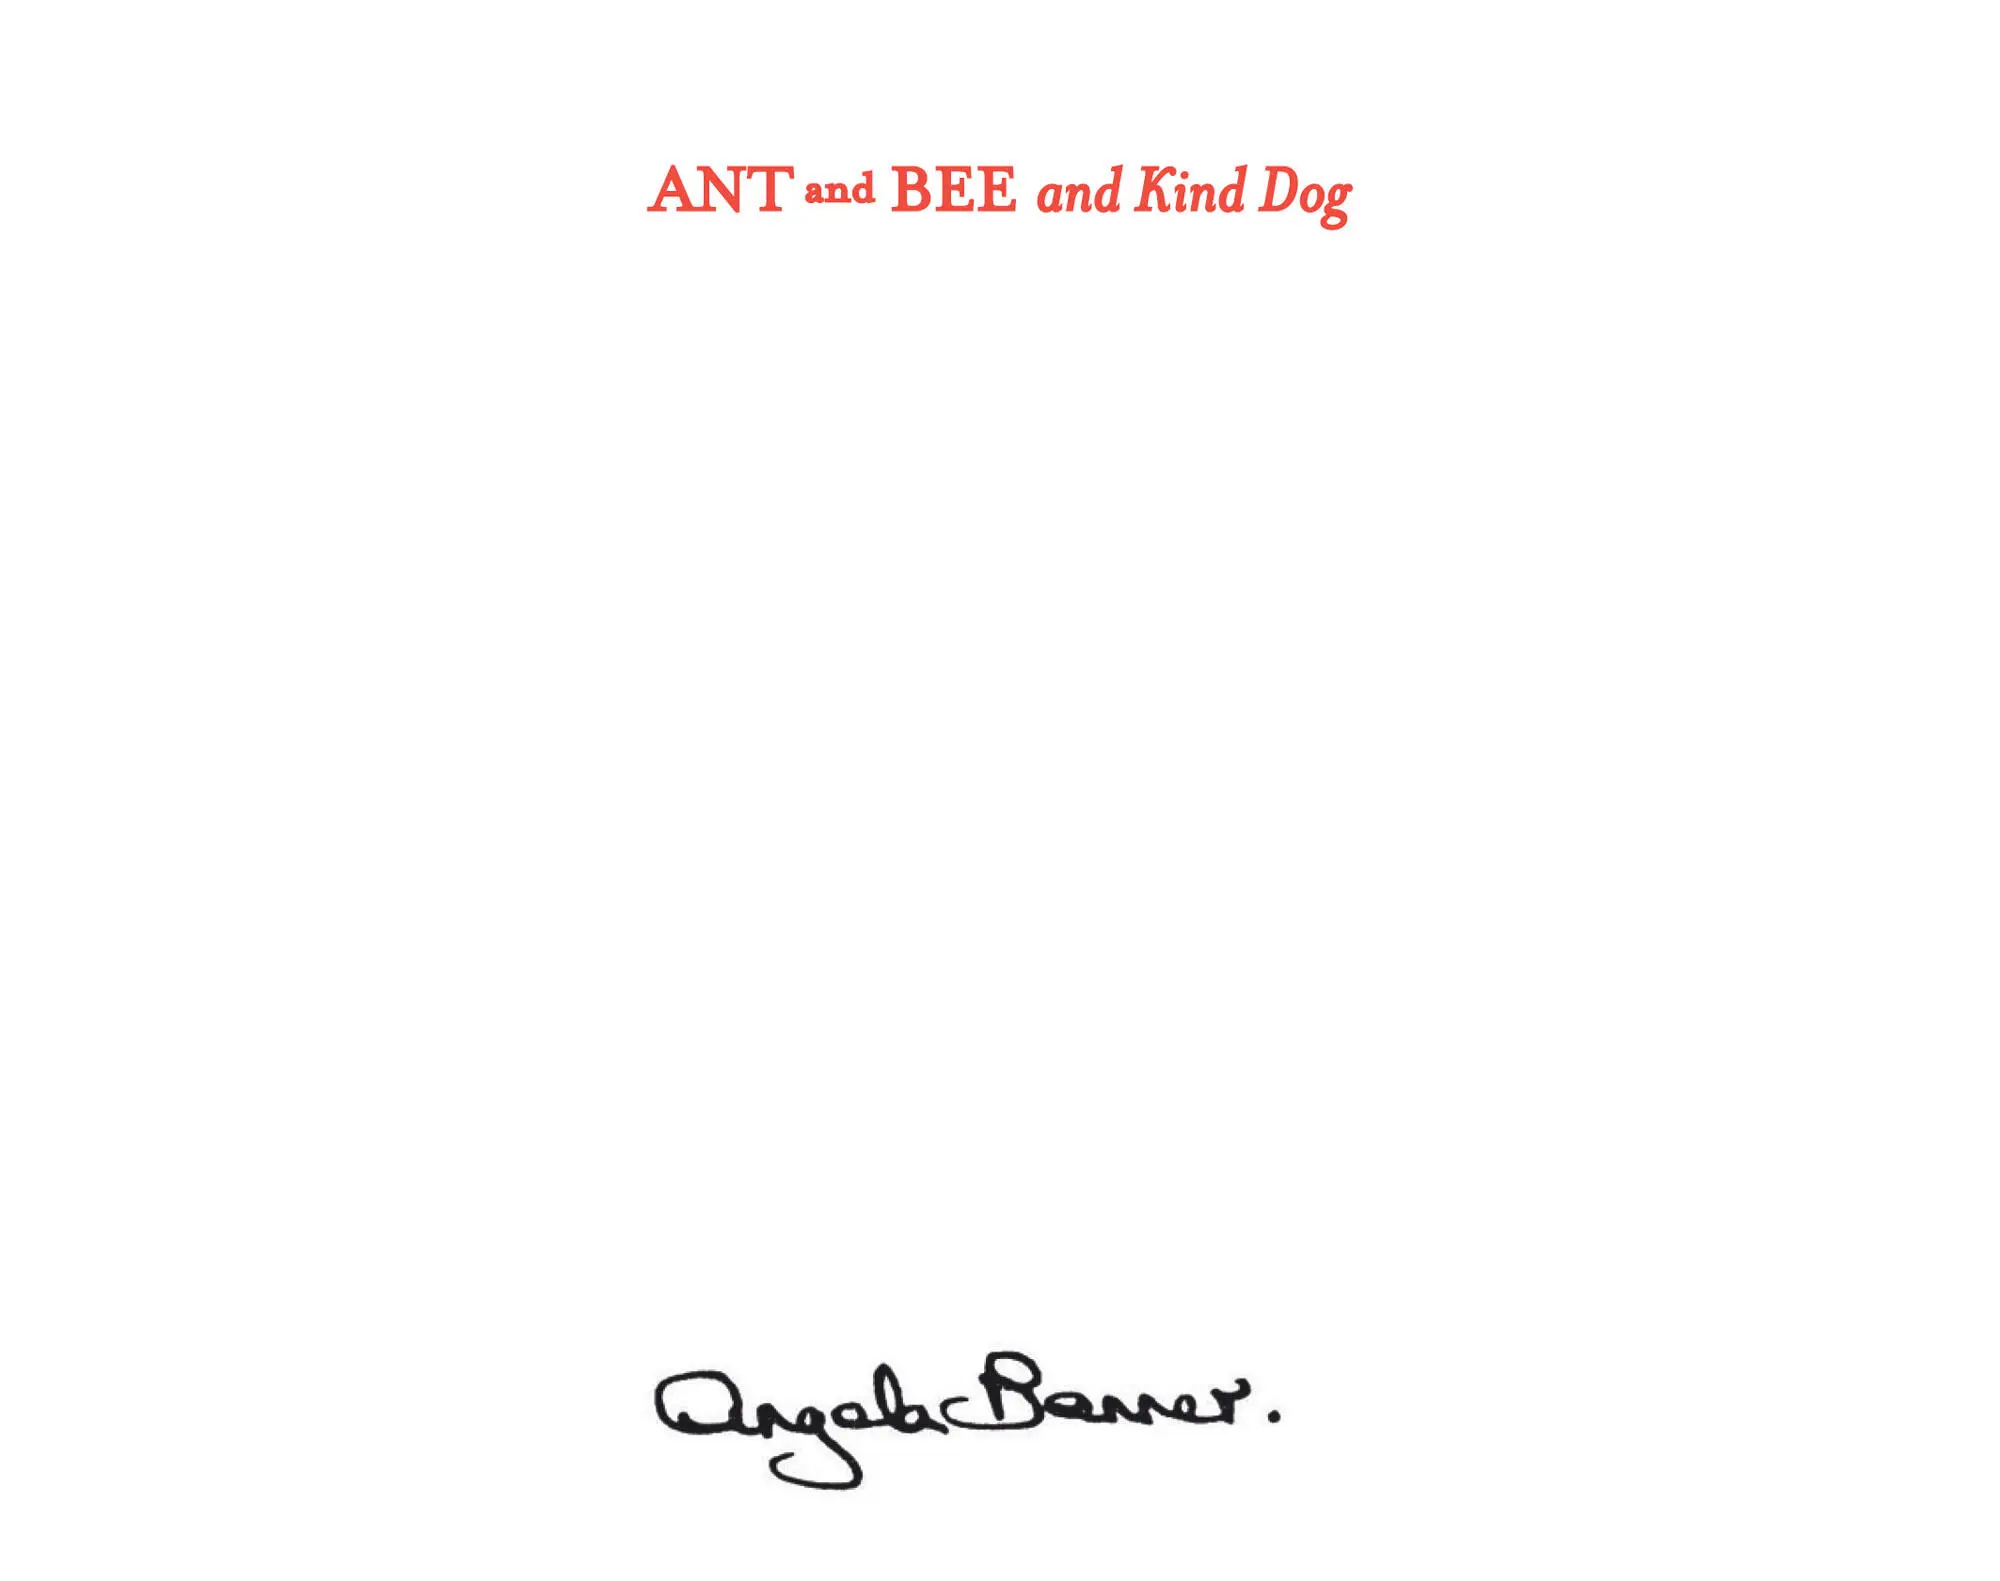 ANT and BEE and Kind Dog is another of my alphabetical stories written for - фото 1